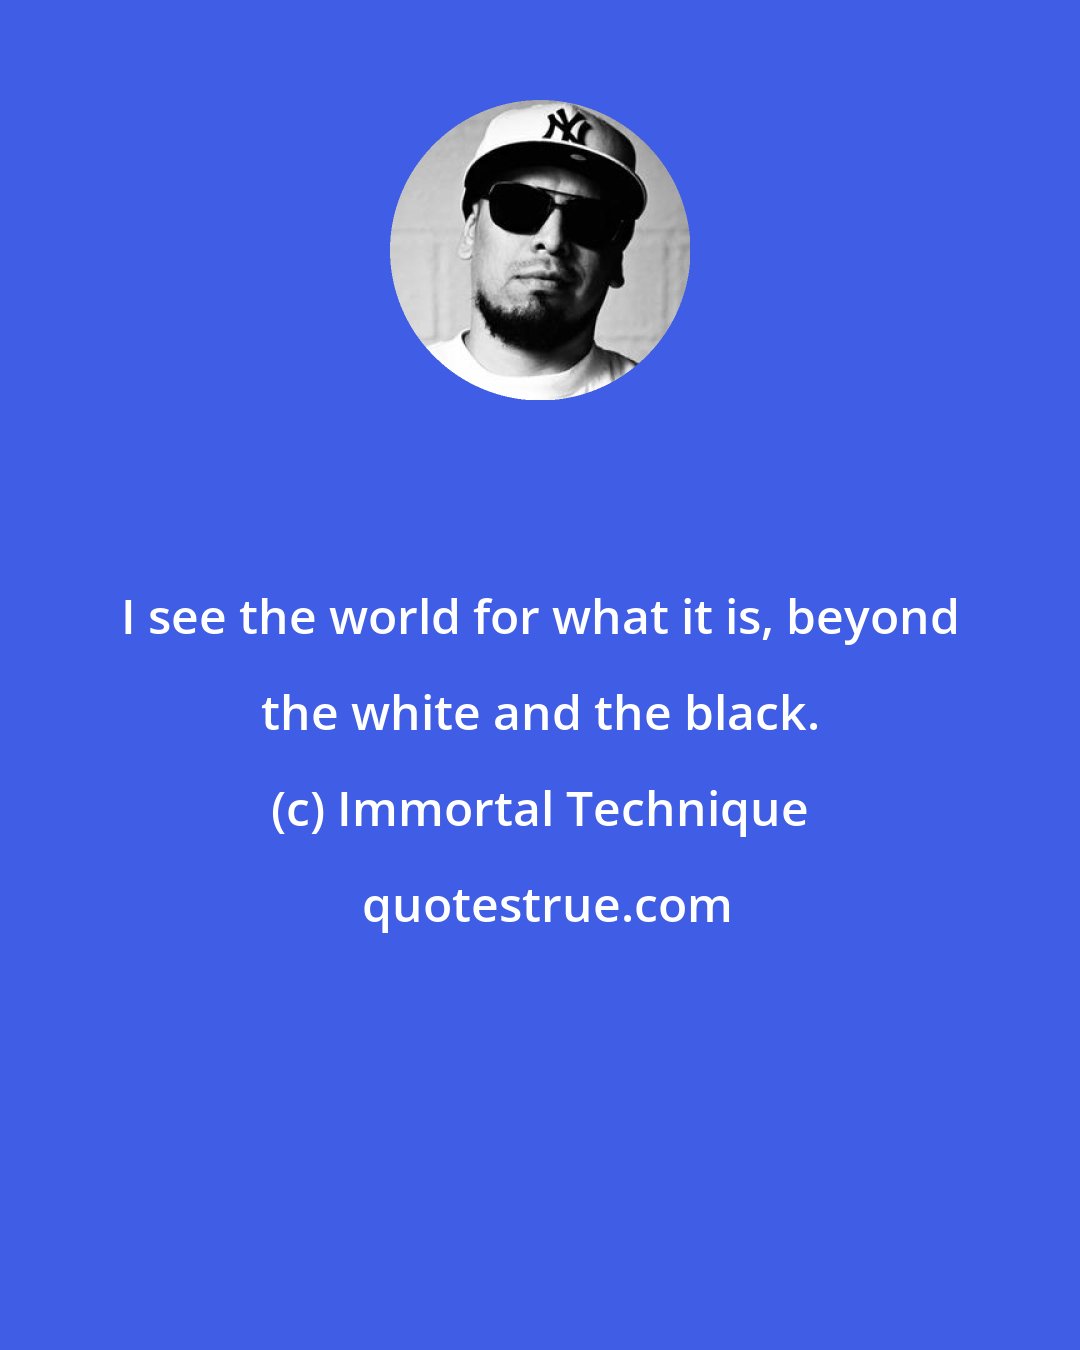 Immortal Technique: I see the world for what it is, beyond the white and the black.